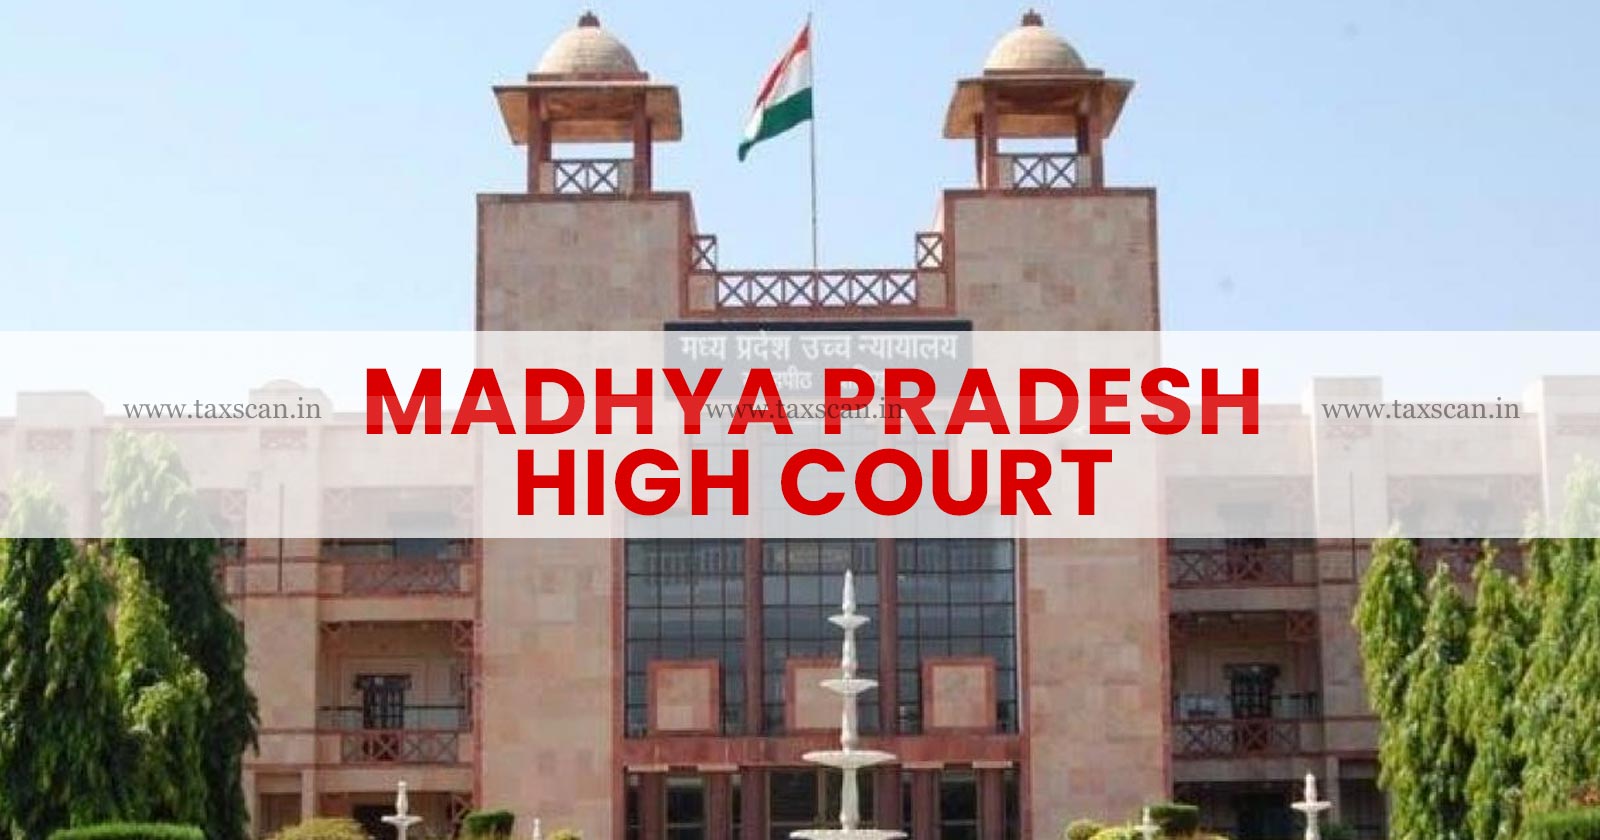 No Incriminating Material - Search - Madhya Pradesh High Court - Deleting Addition - Addition - Taxscan